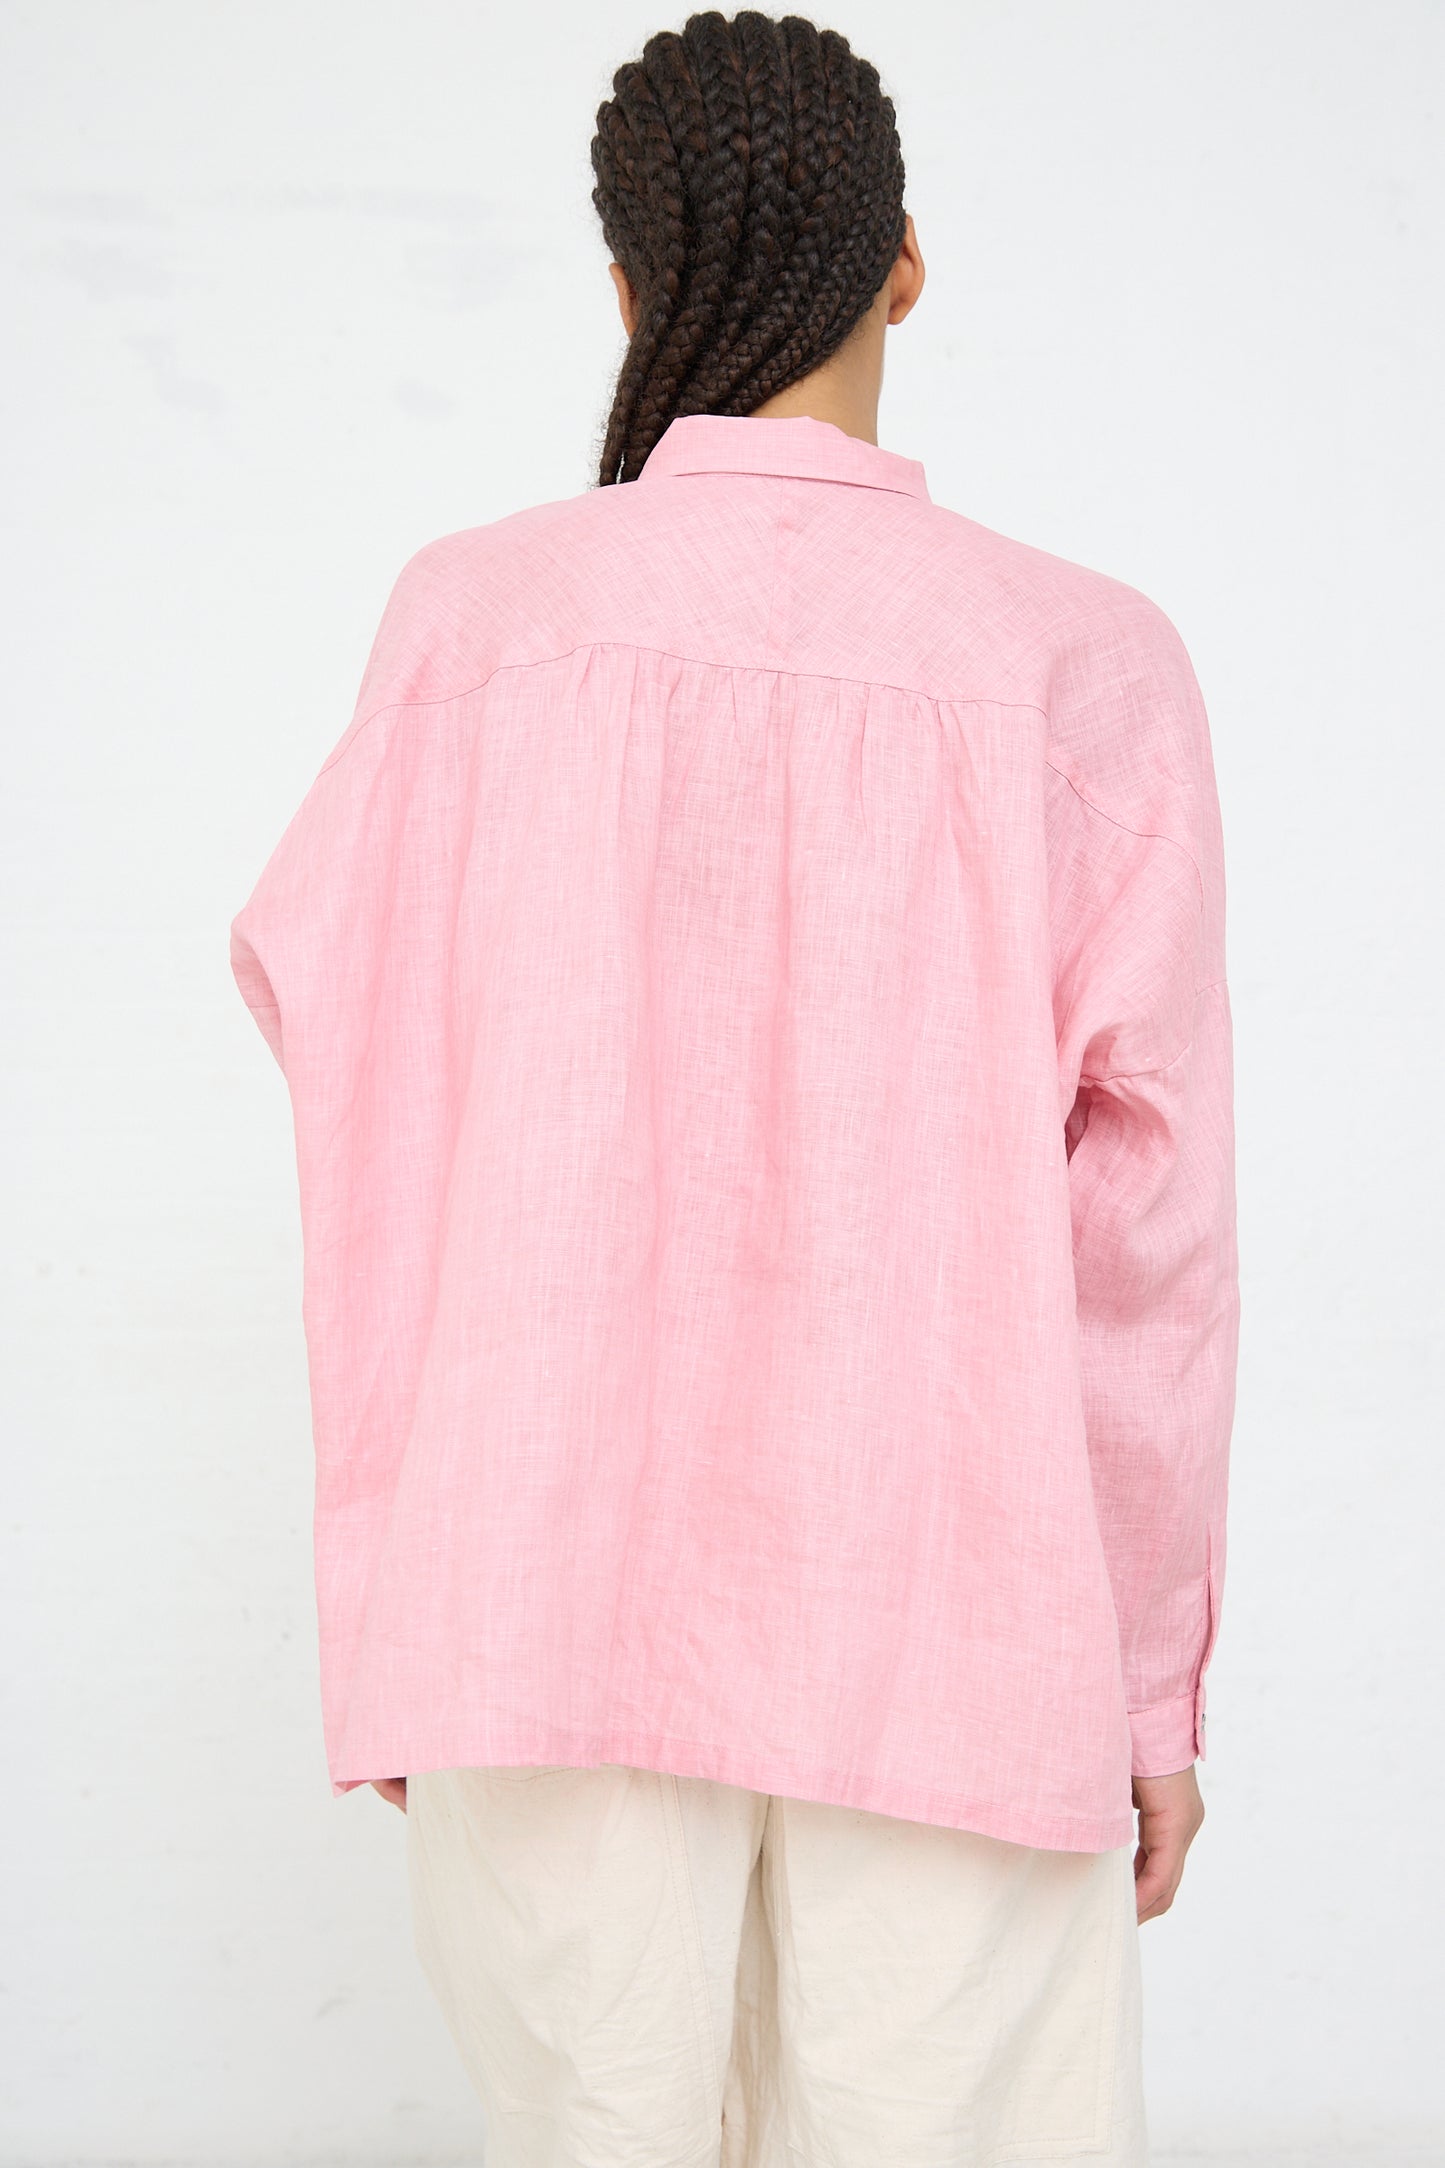 Person standing with back to the camera wearing a Ichi Antiquités Woven Linen Shirt in Pink and beige pants.